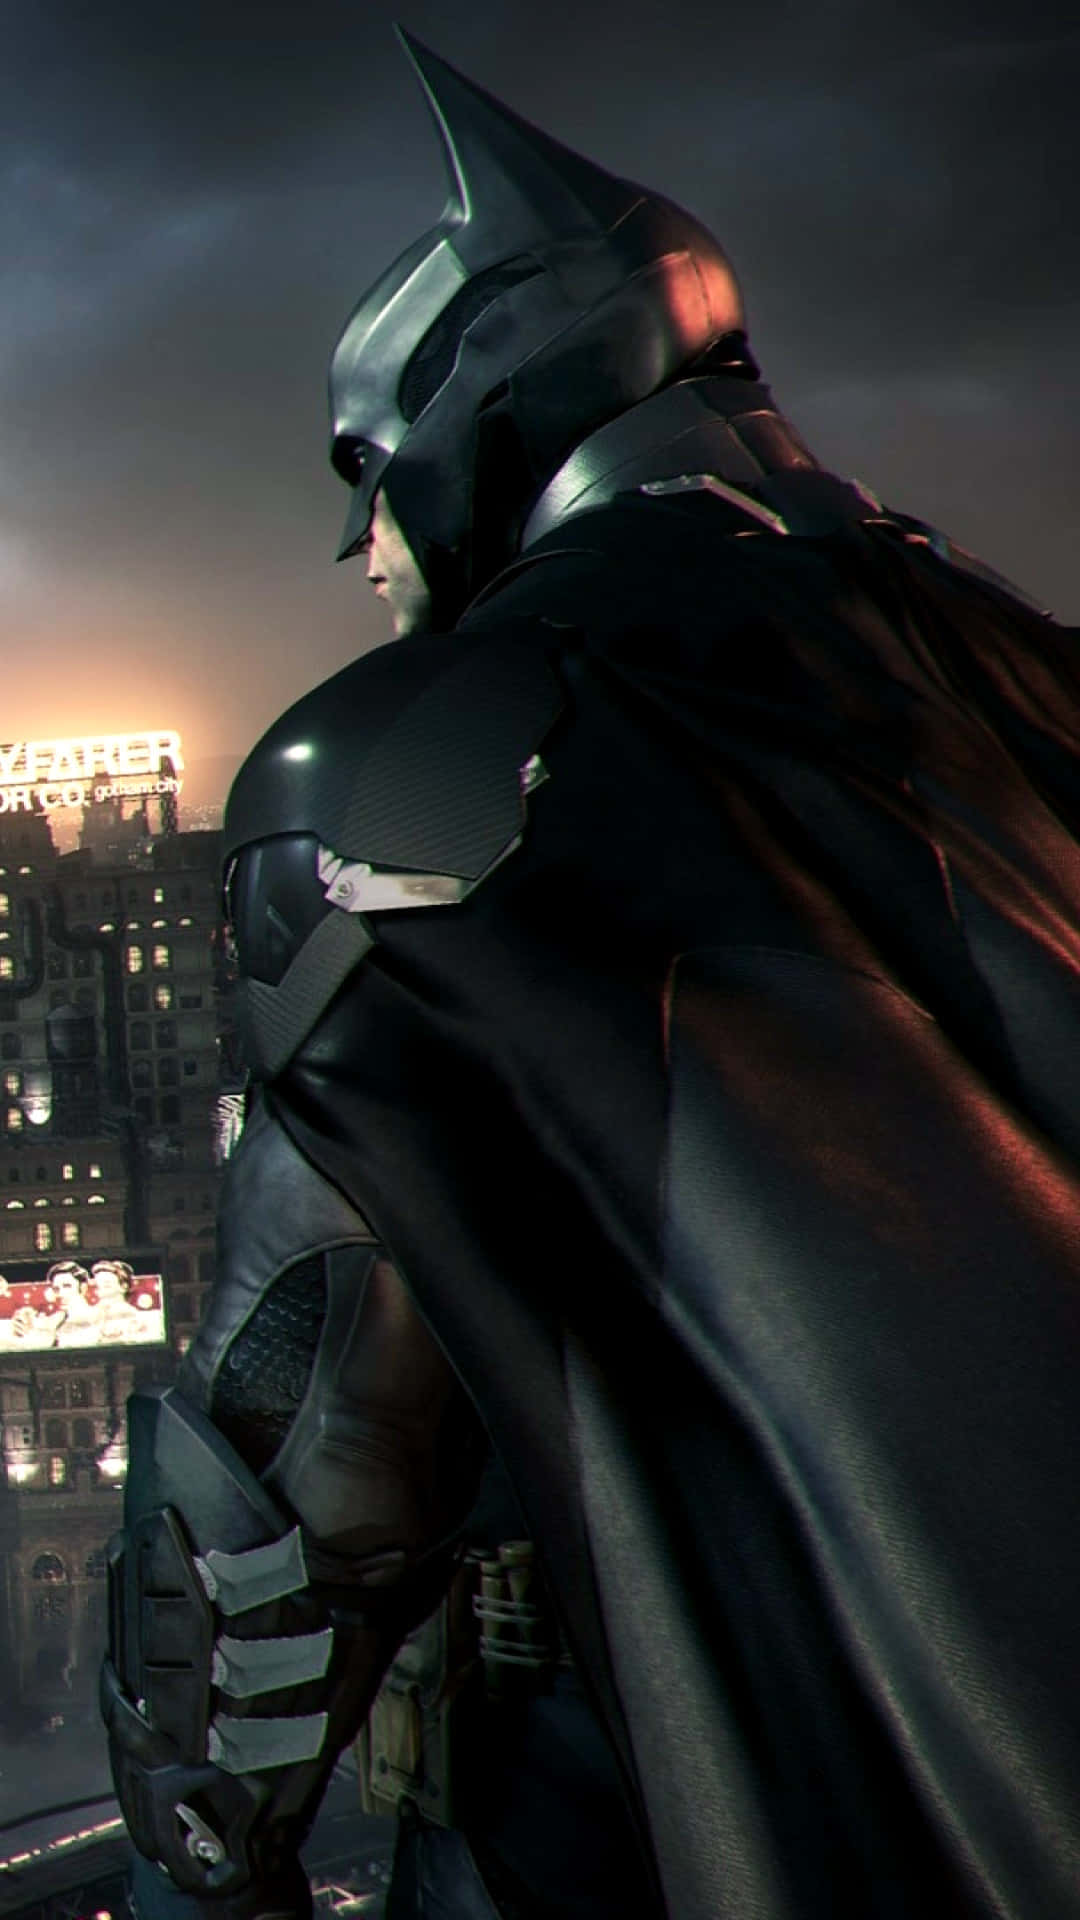 "The Caped Crusader Saves the Day – Enjoy the Awesome Batman Iphone!" Wallpaper